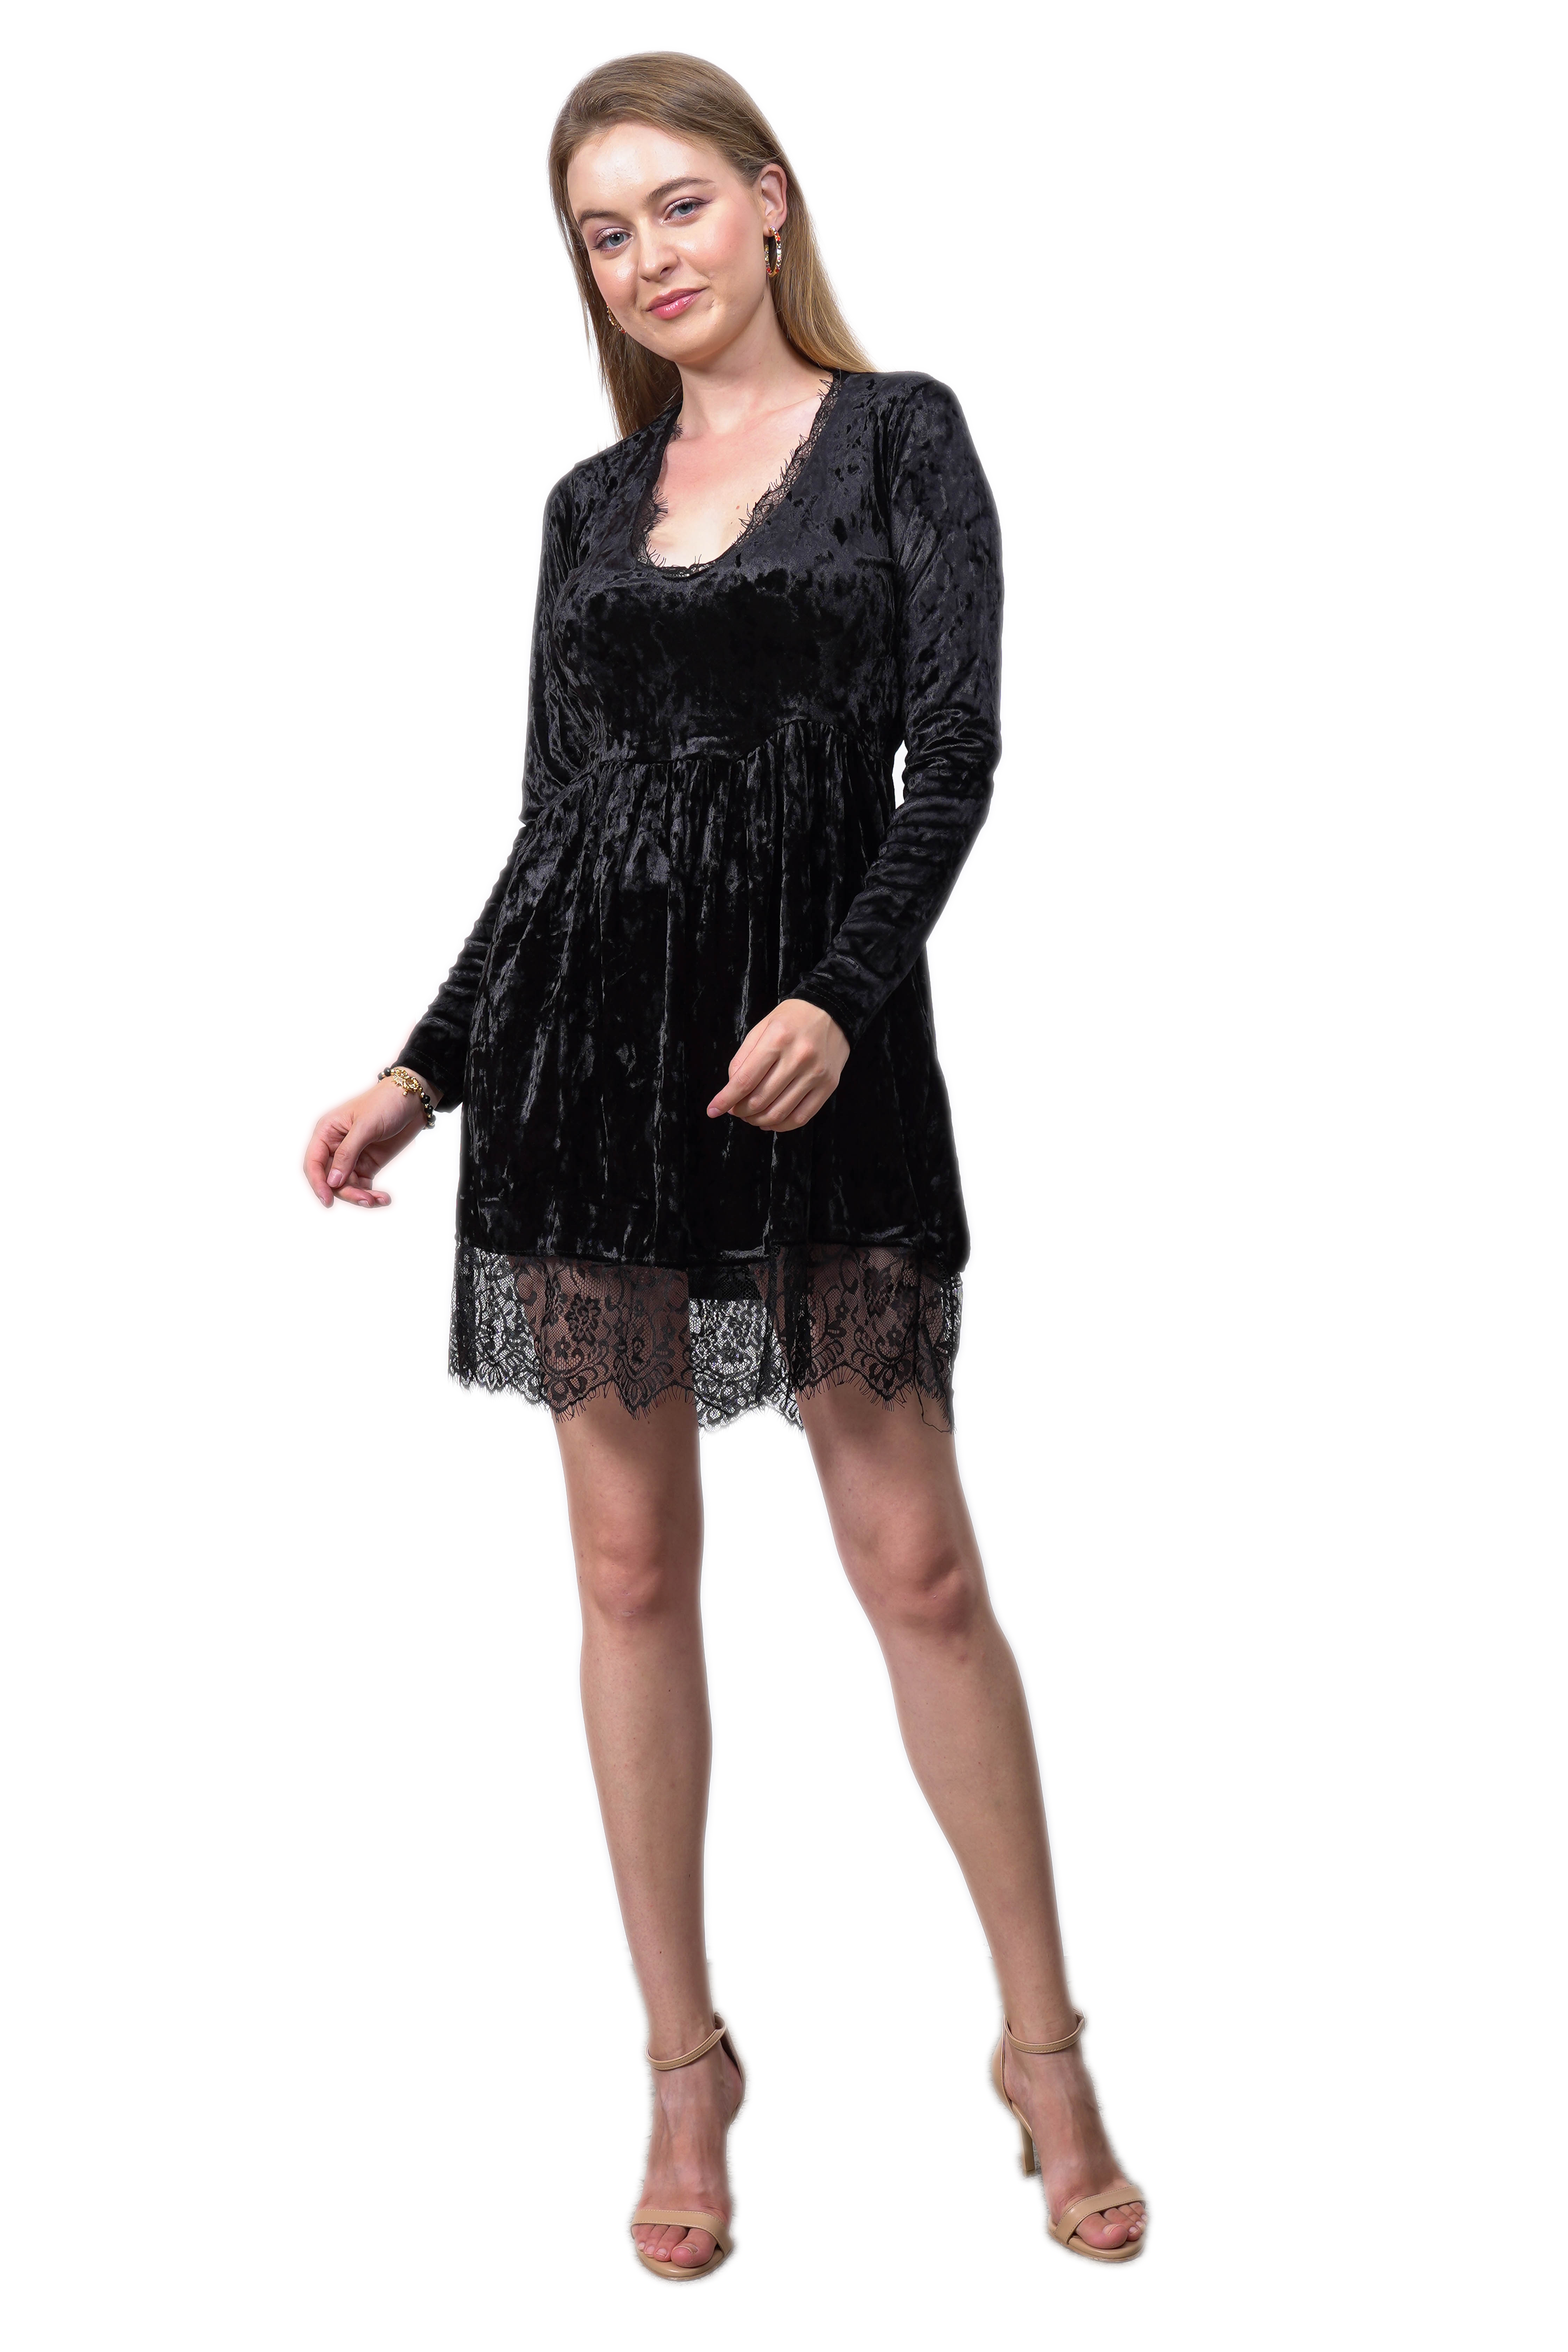 A model wears PLA10050 - Lace V-Neck Velvet Dress, wholesale Dress of Playmax to display at Lonca